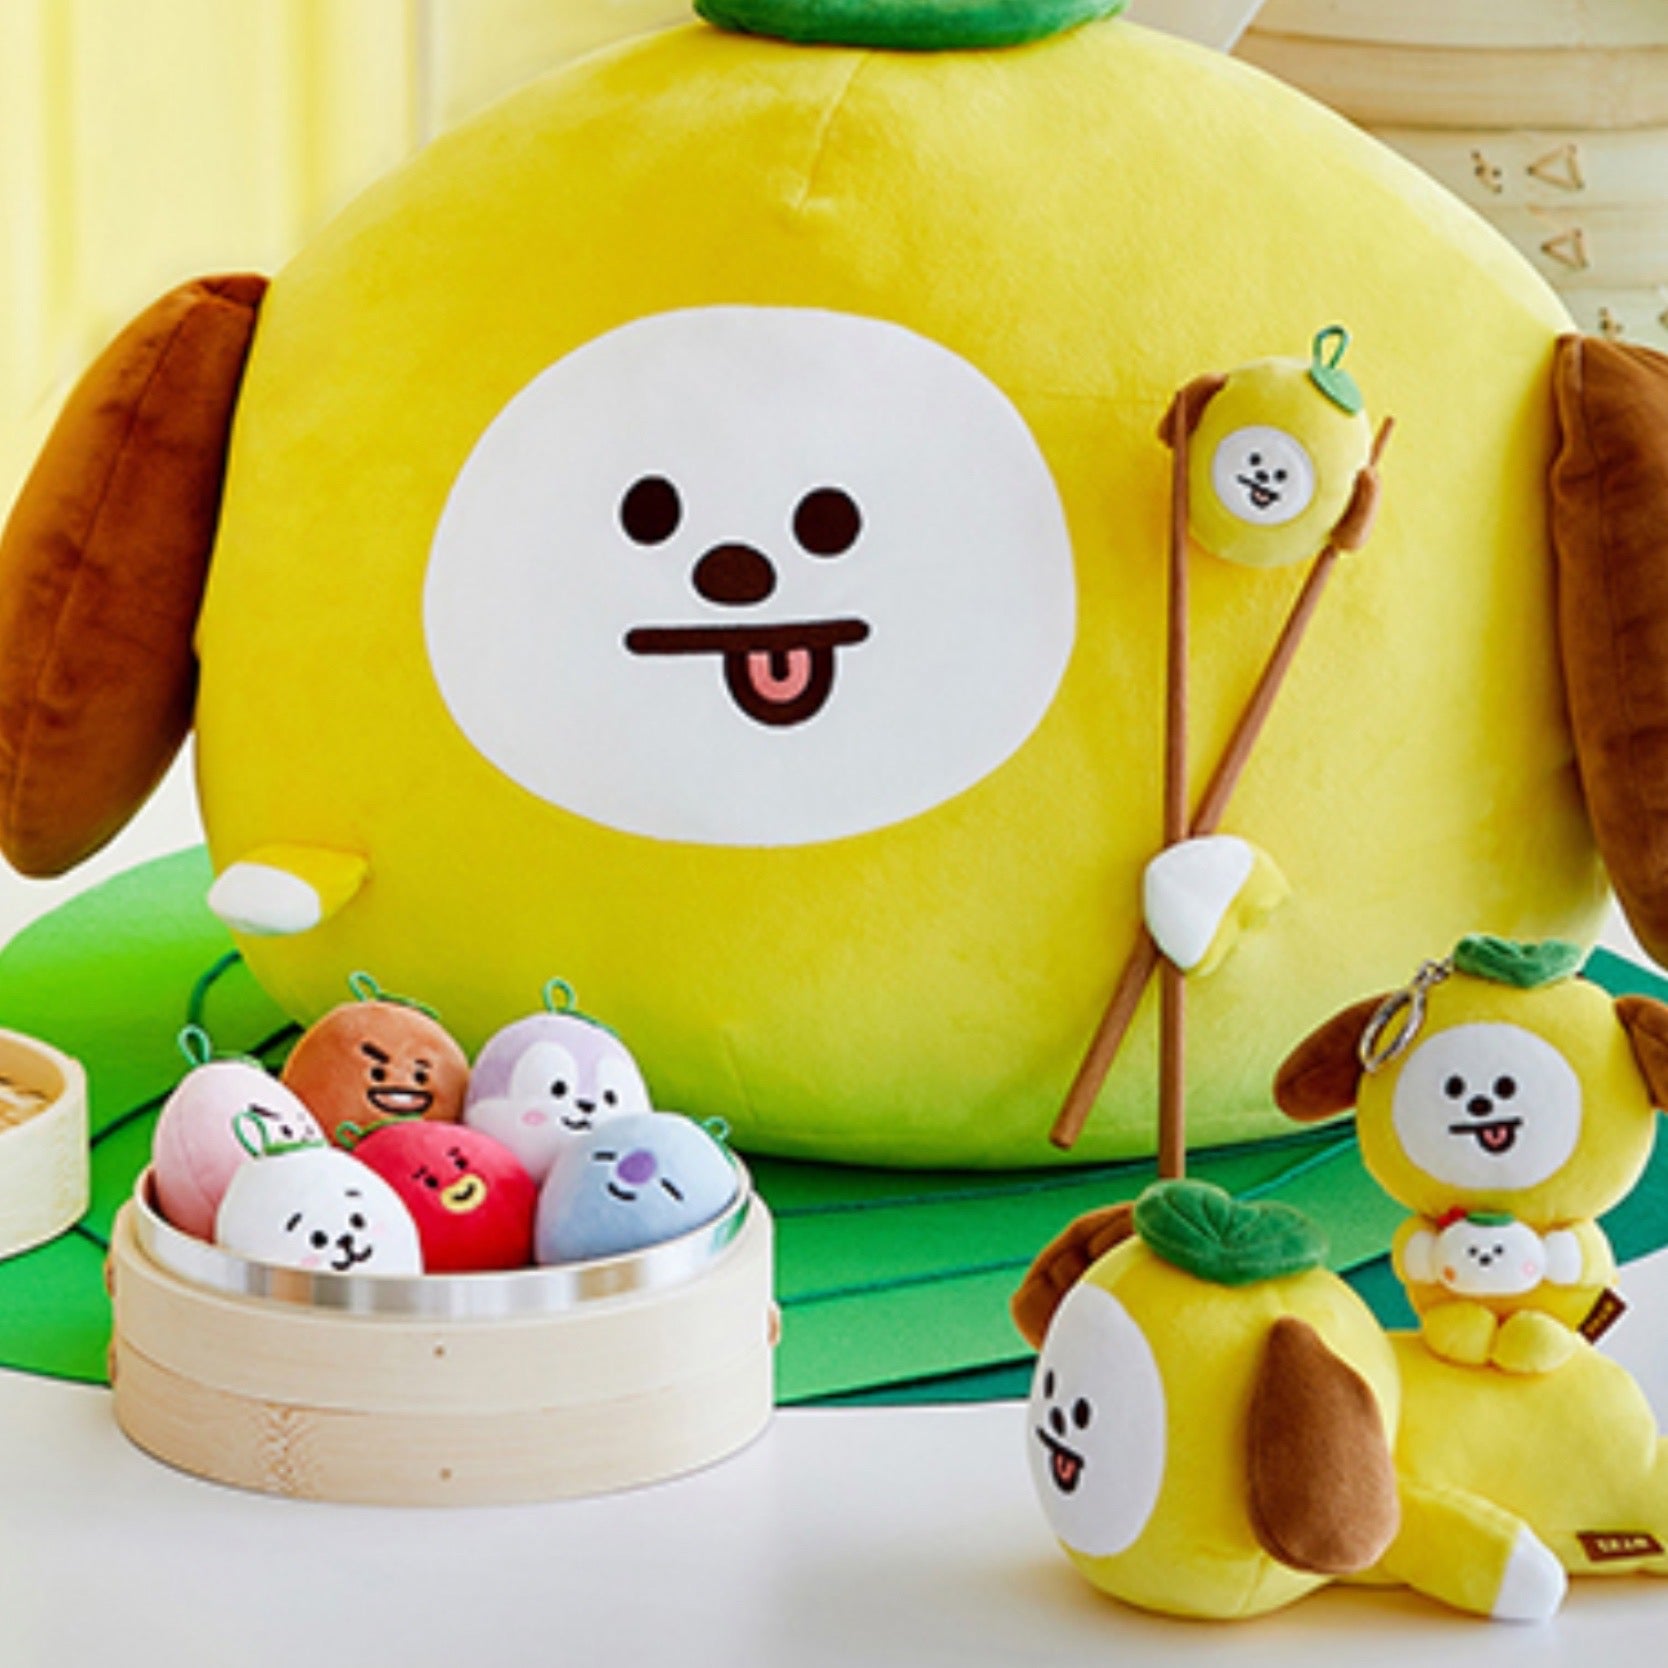 BT21 CHIMMY DESK PILLOW FOR NAPPING CHEWY CHEWY CHIMMY